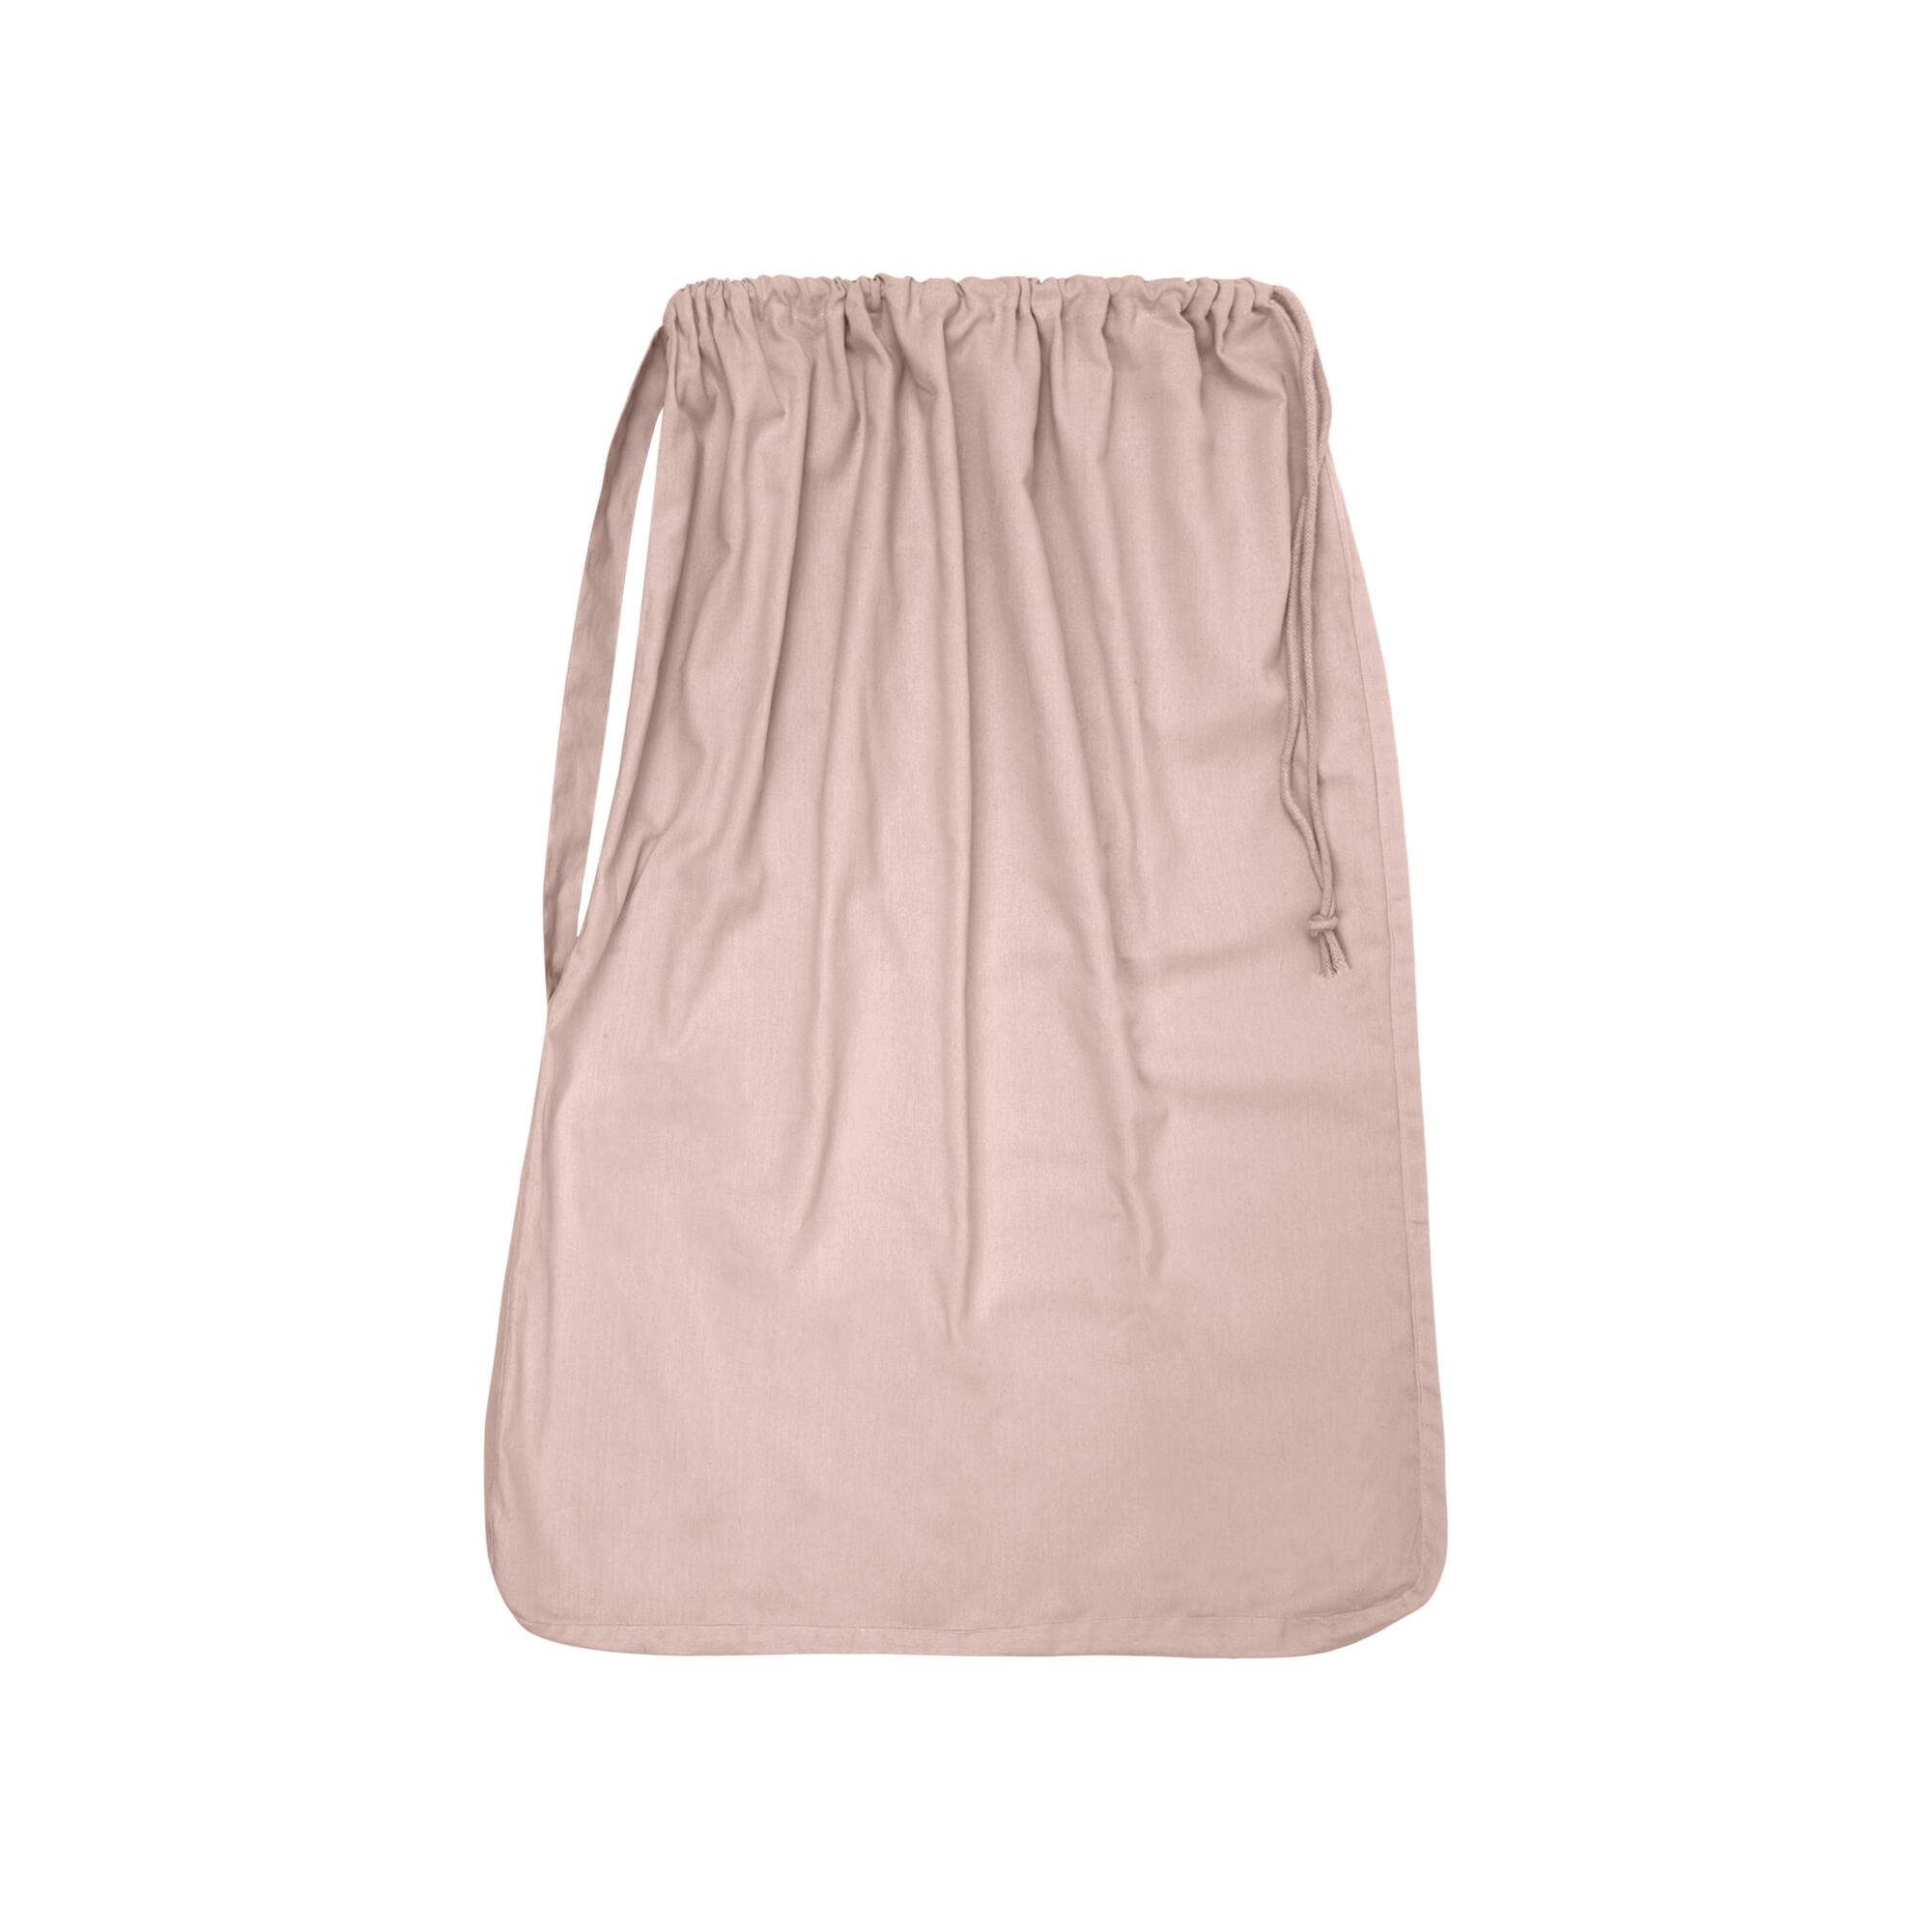 Laundry and Storage Bag, Pale rose